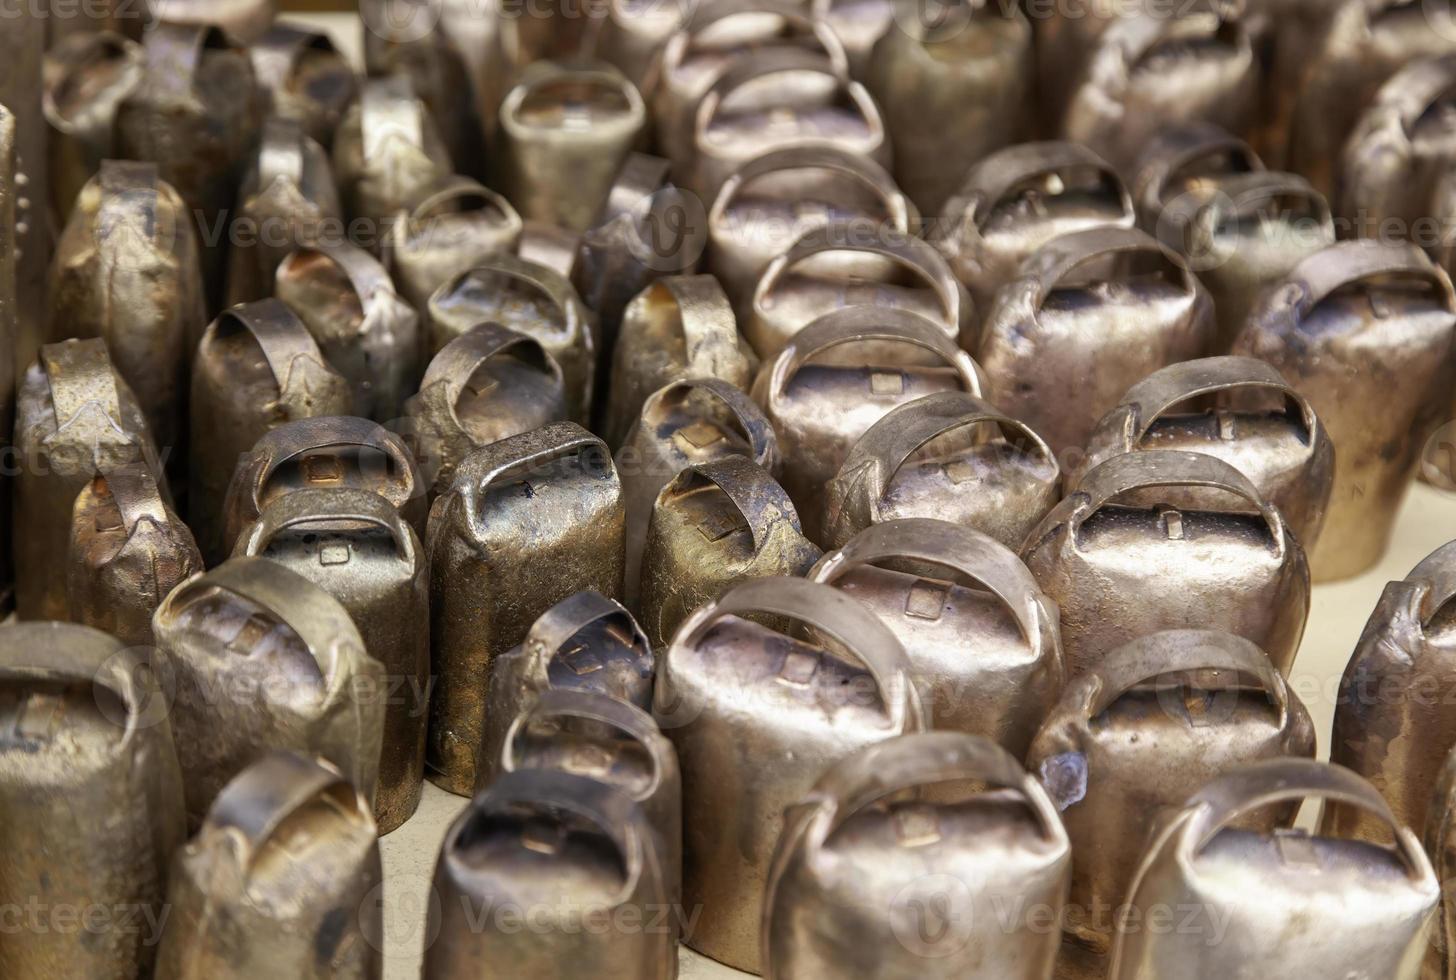 Cow bells in a market photo